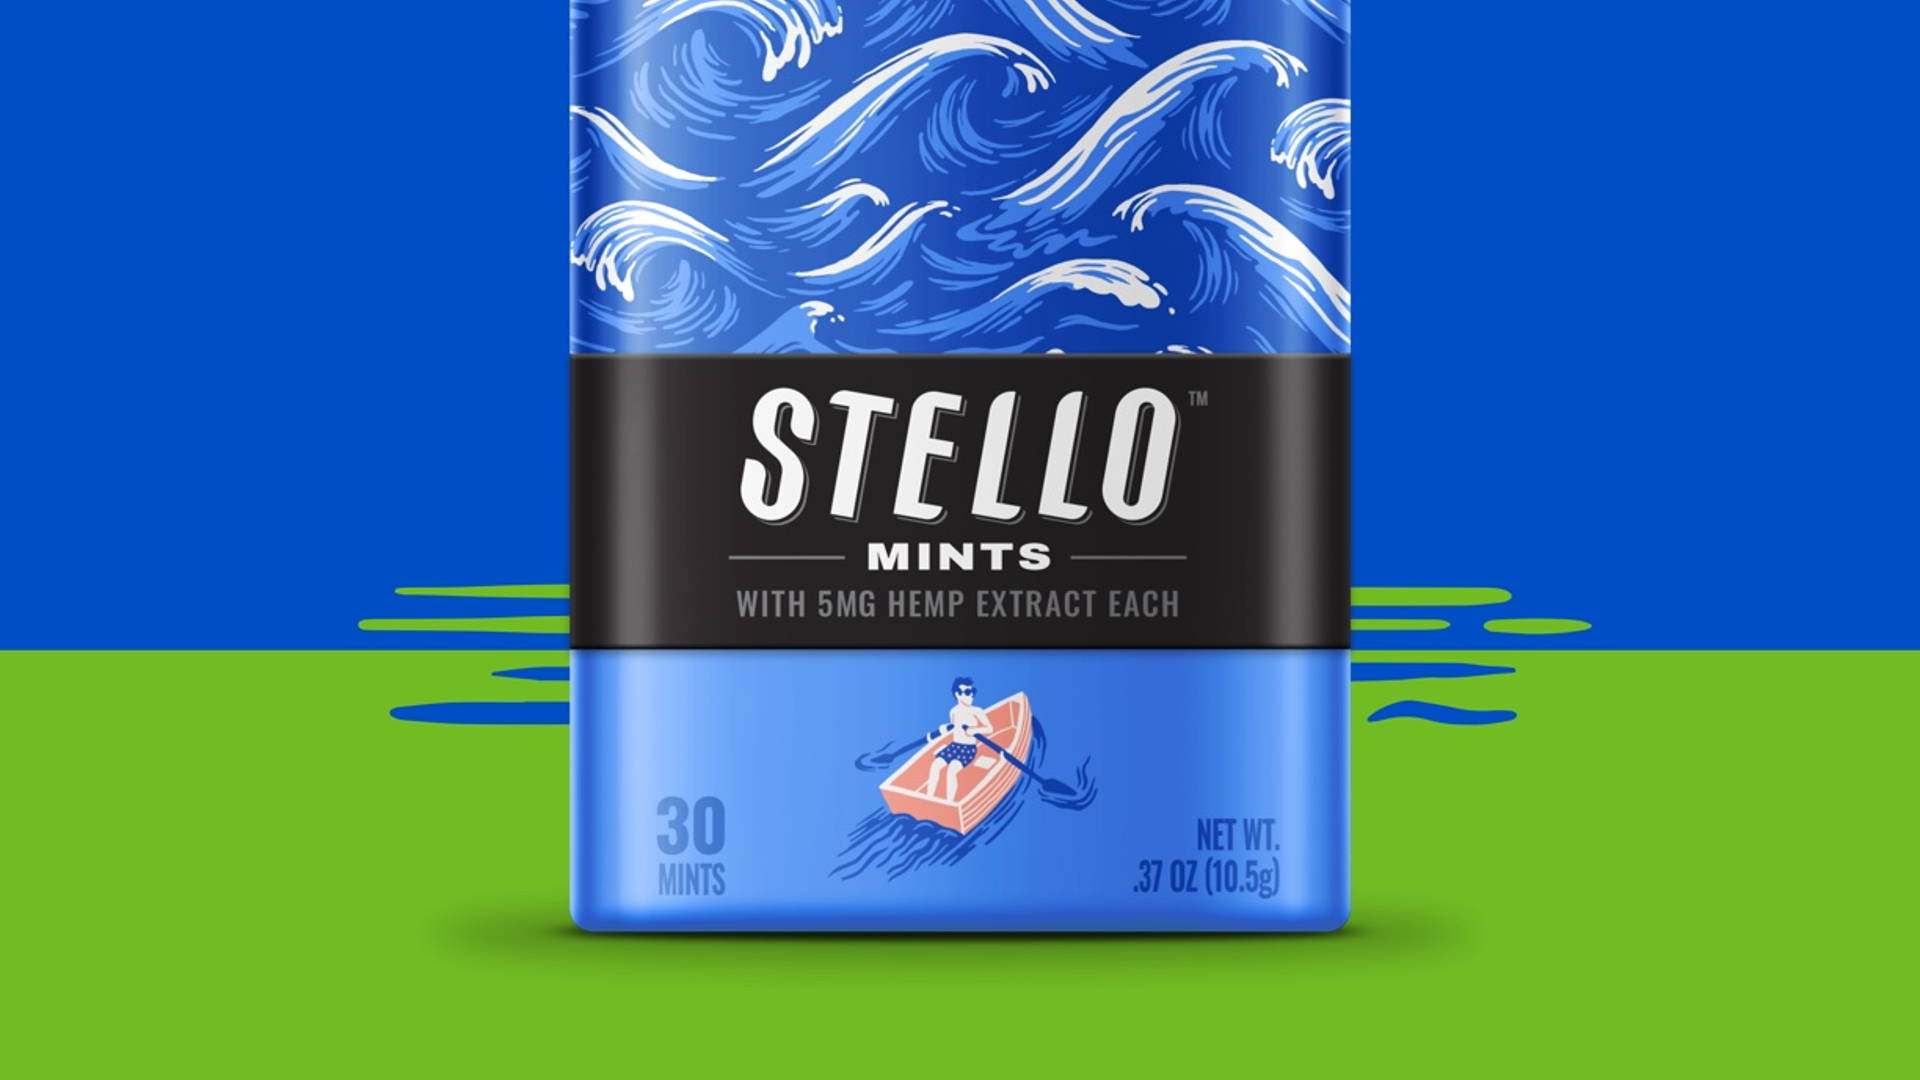 Featured image for Meet Your New Stress-Diffusing Sidekick: Stello CBD Mints